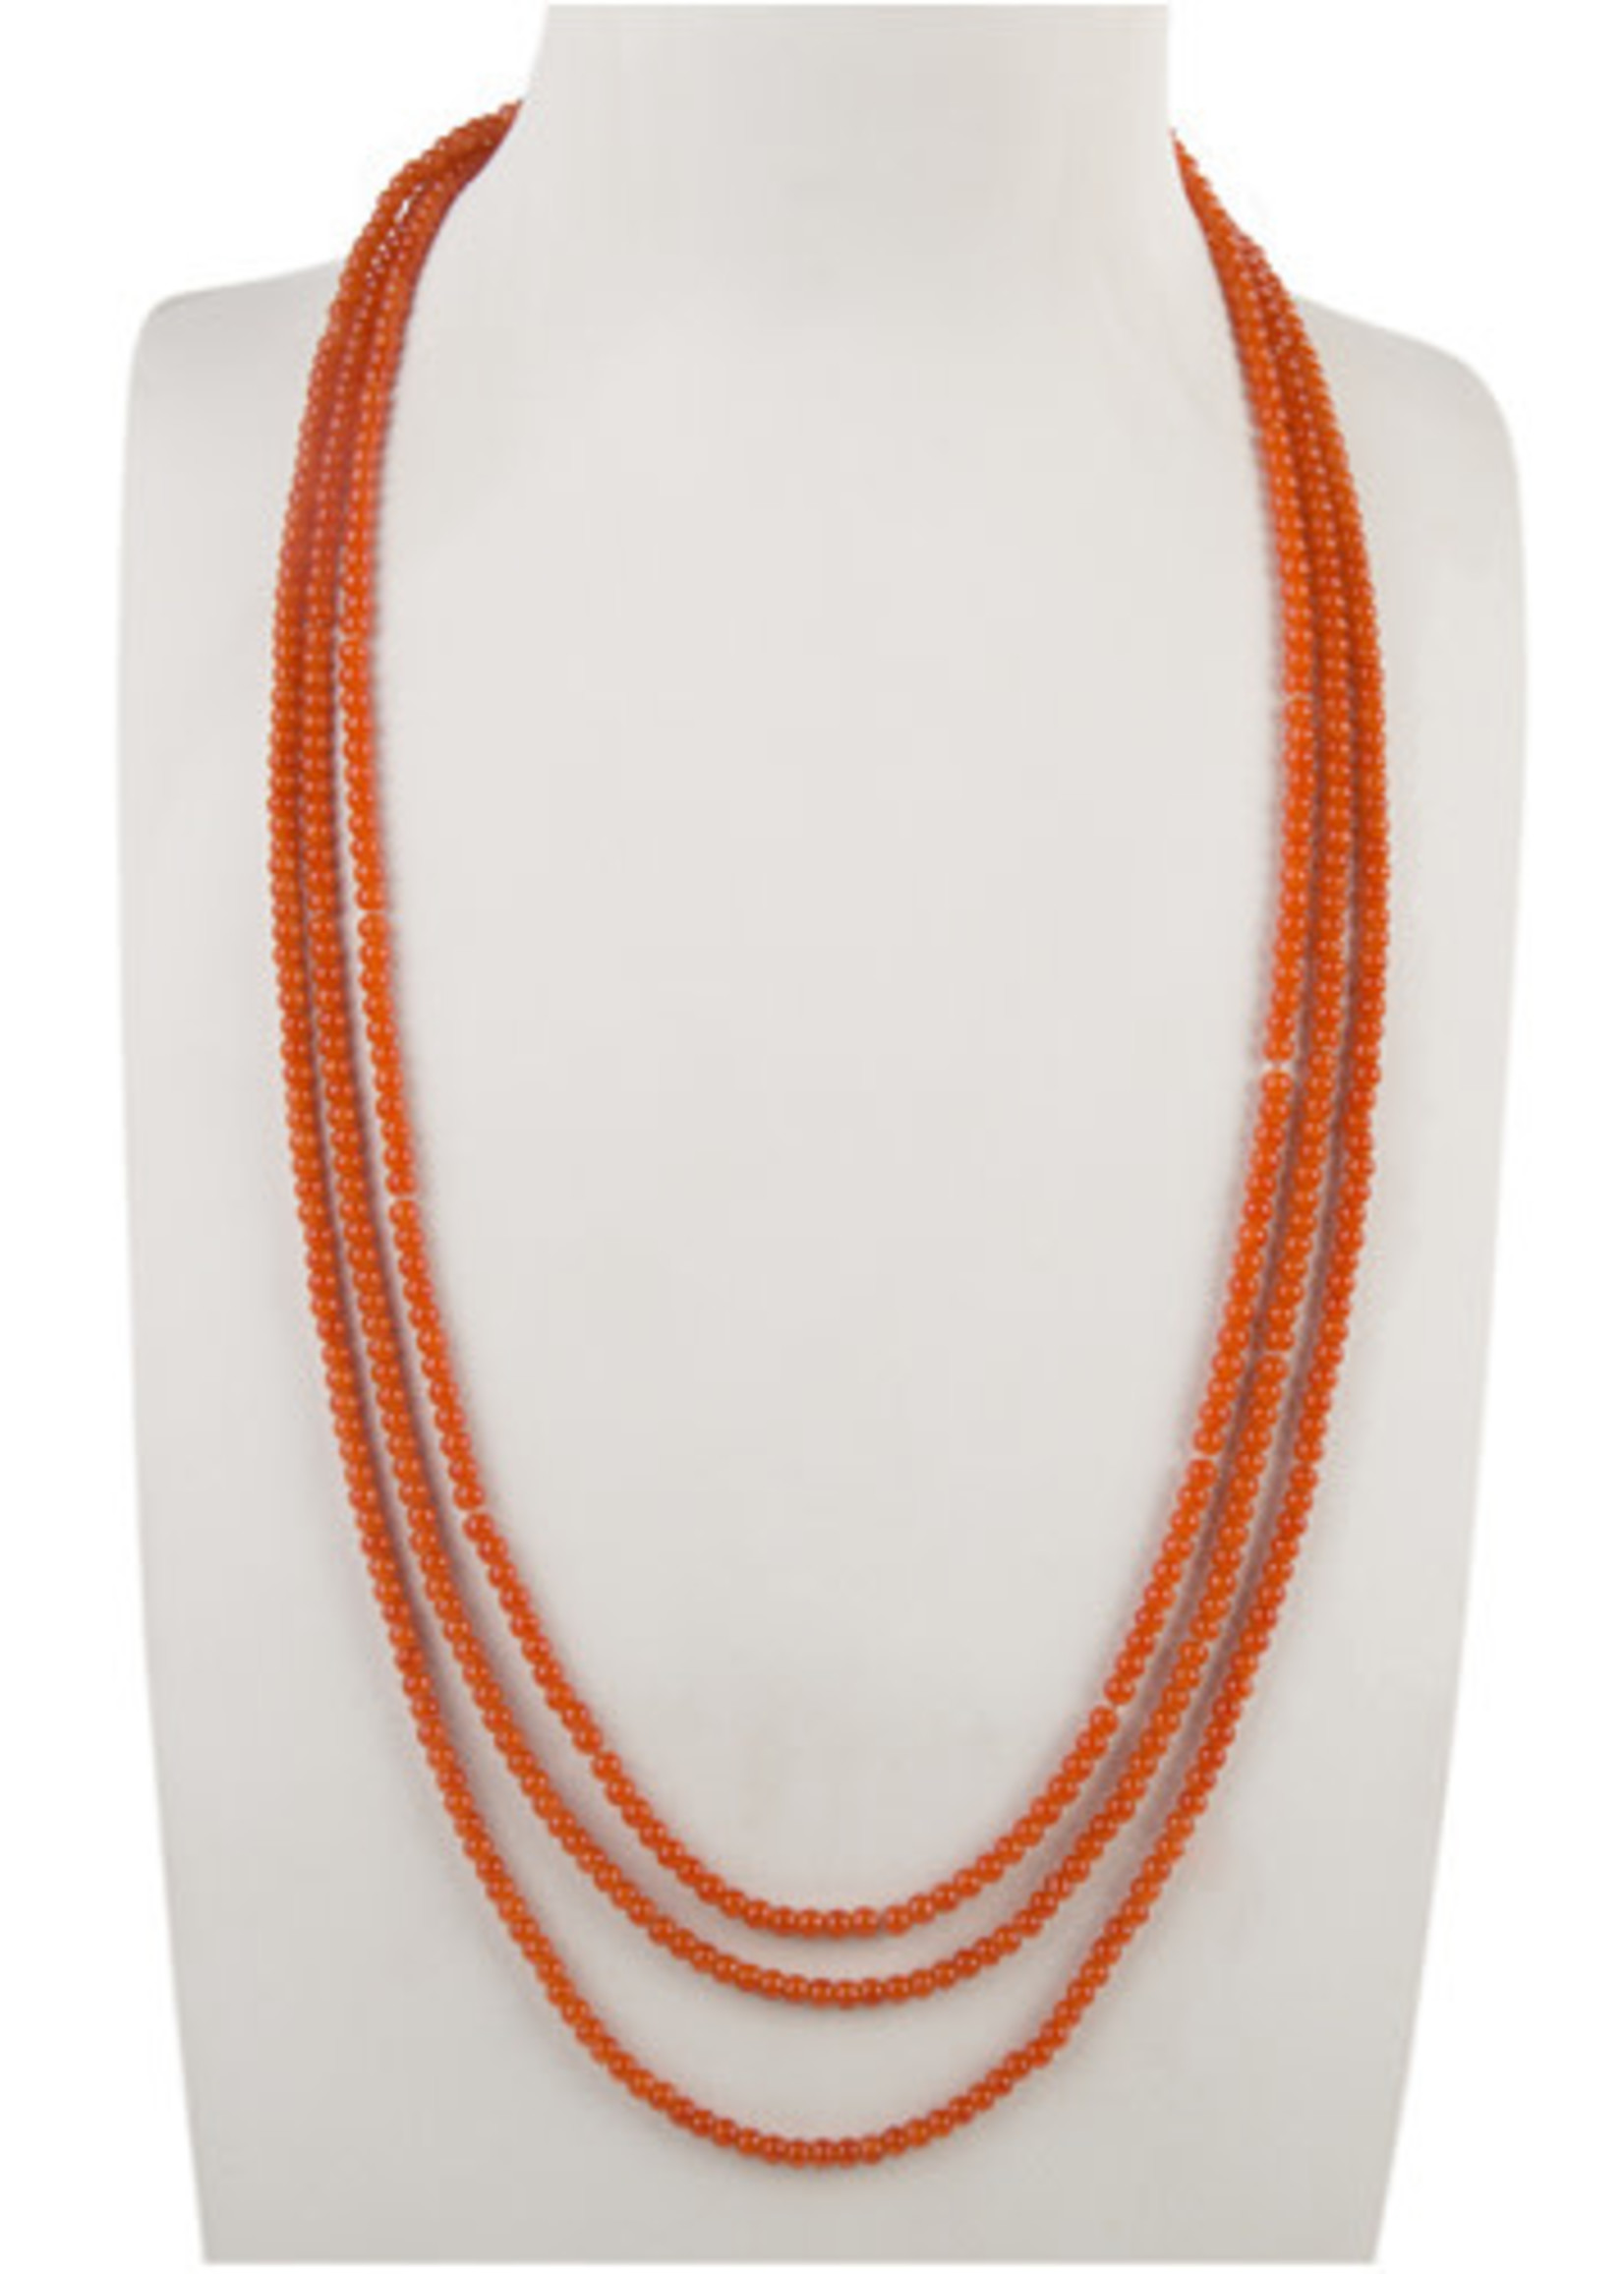 Taylor Hill Tangelo Orange 3 Strand Bead Necklace